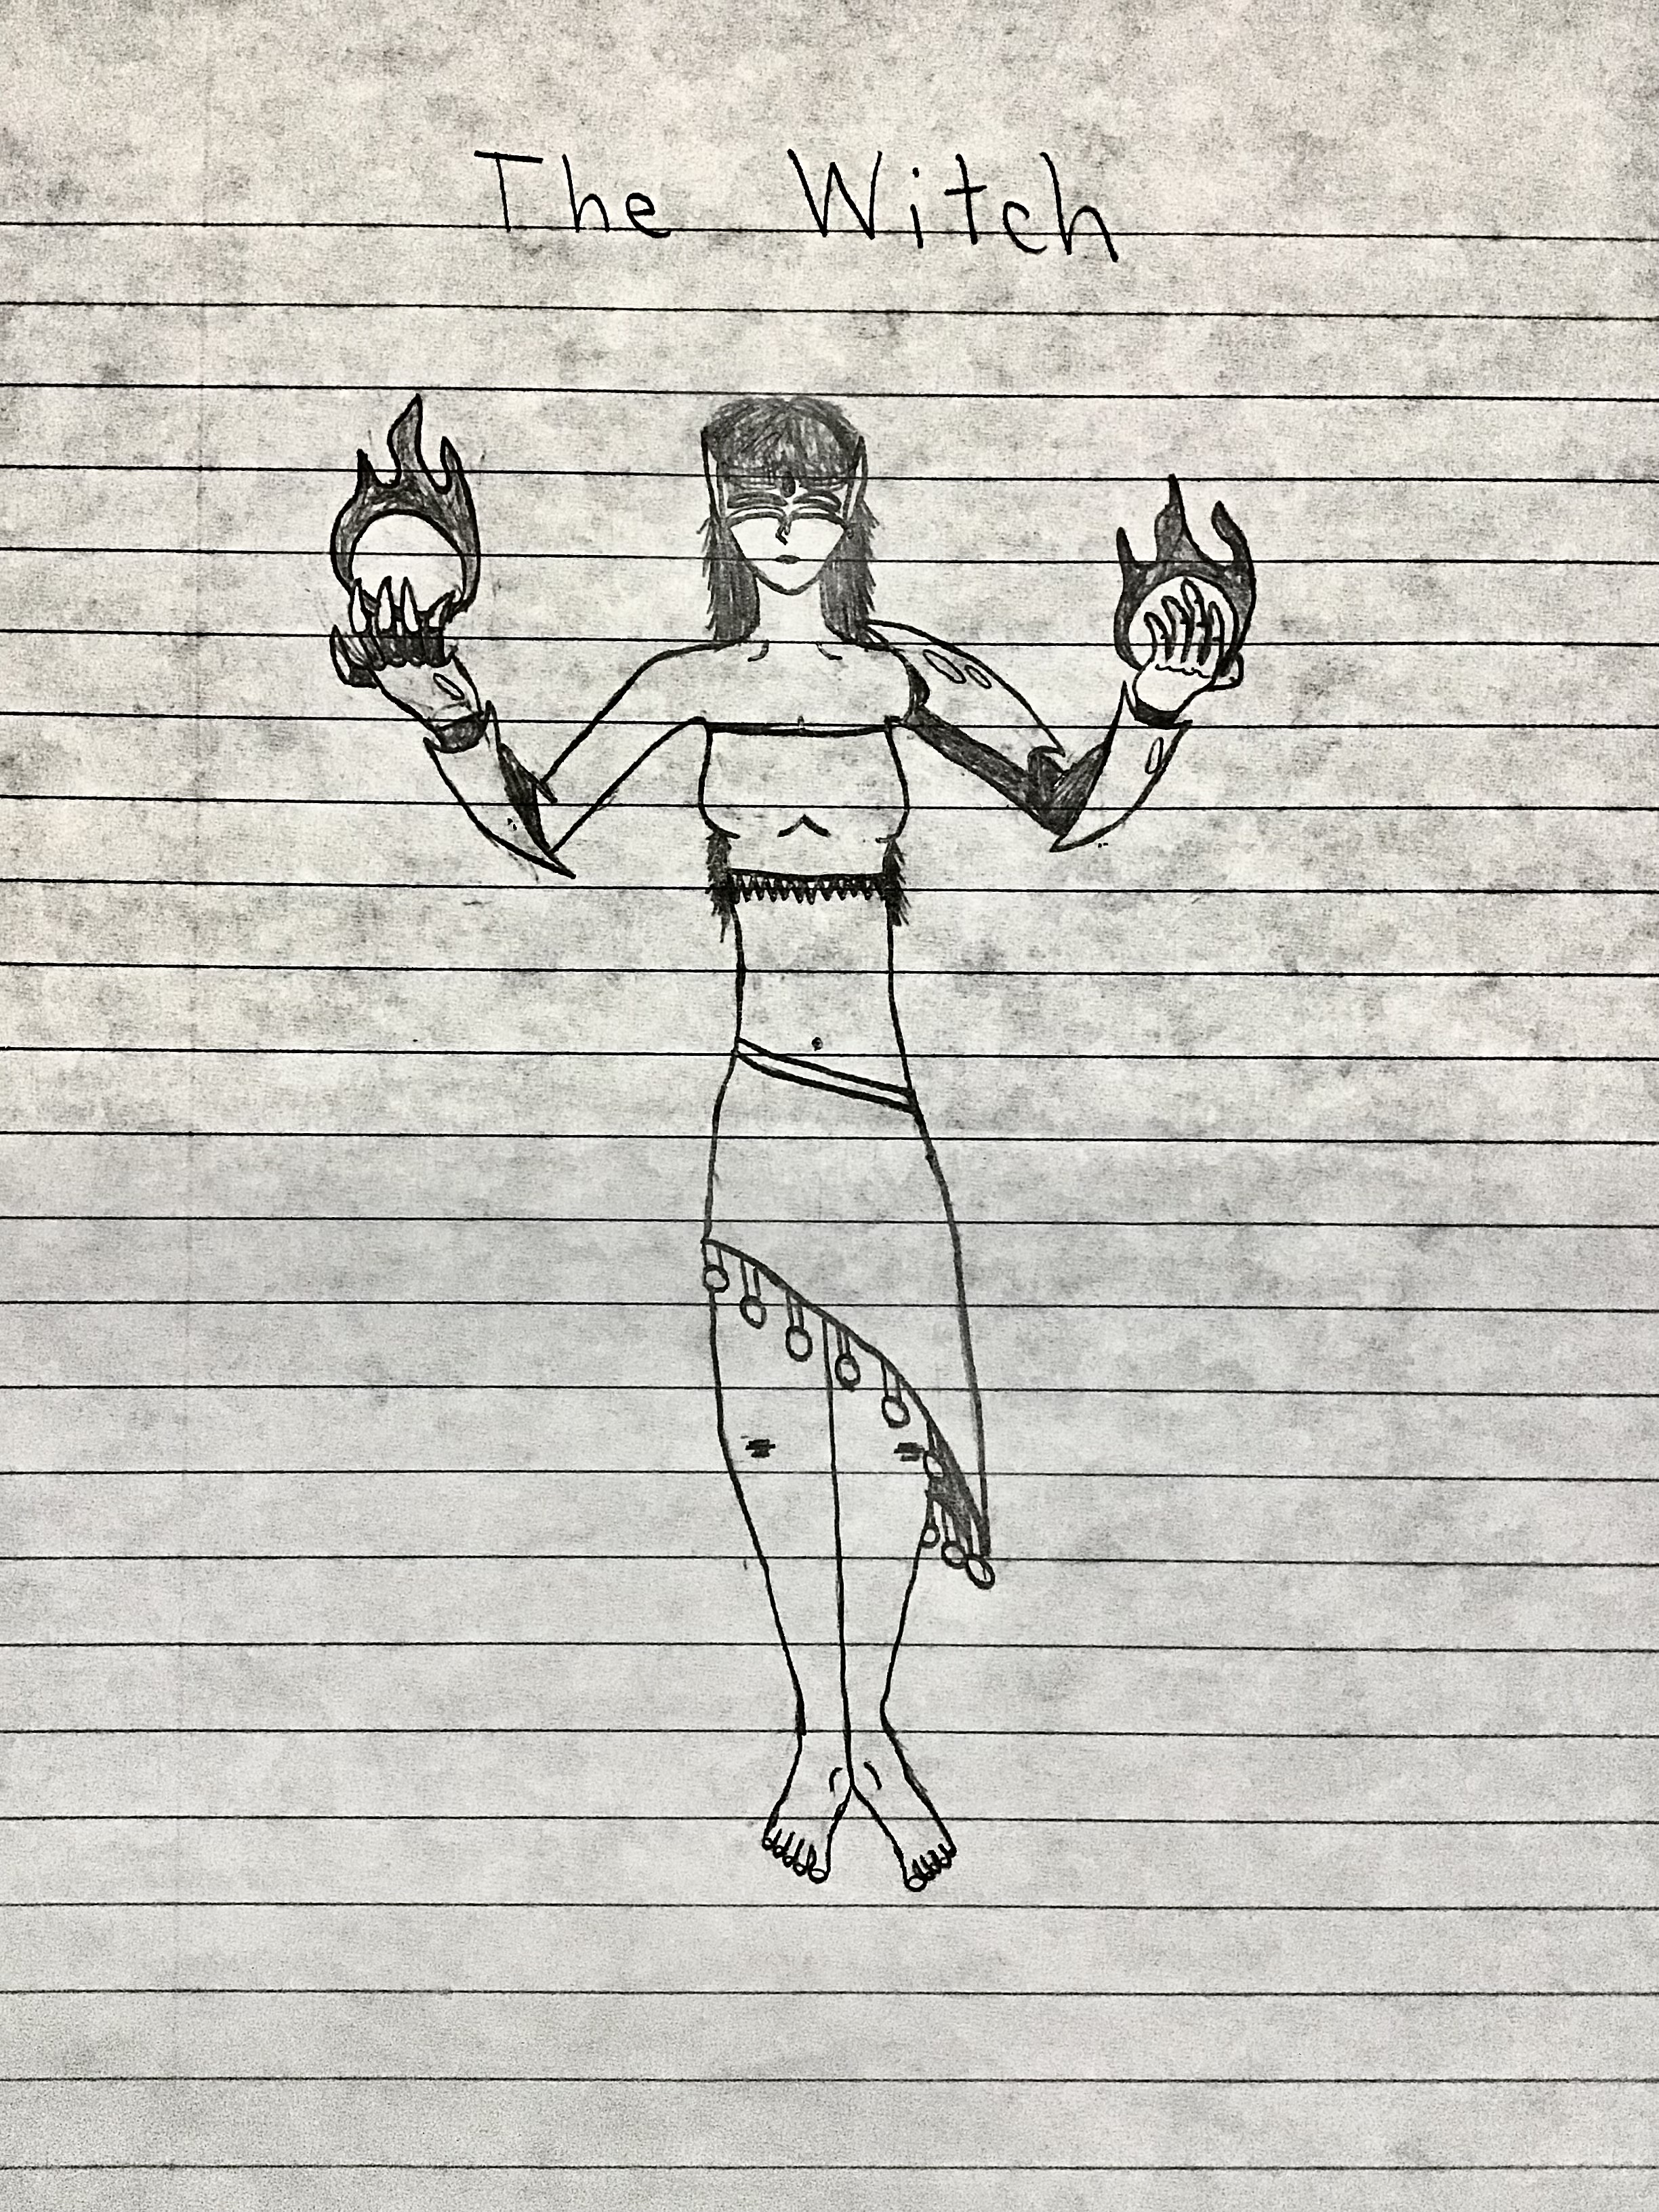 First Drawing of “The Witch”